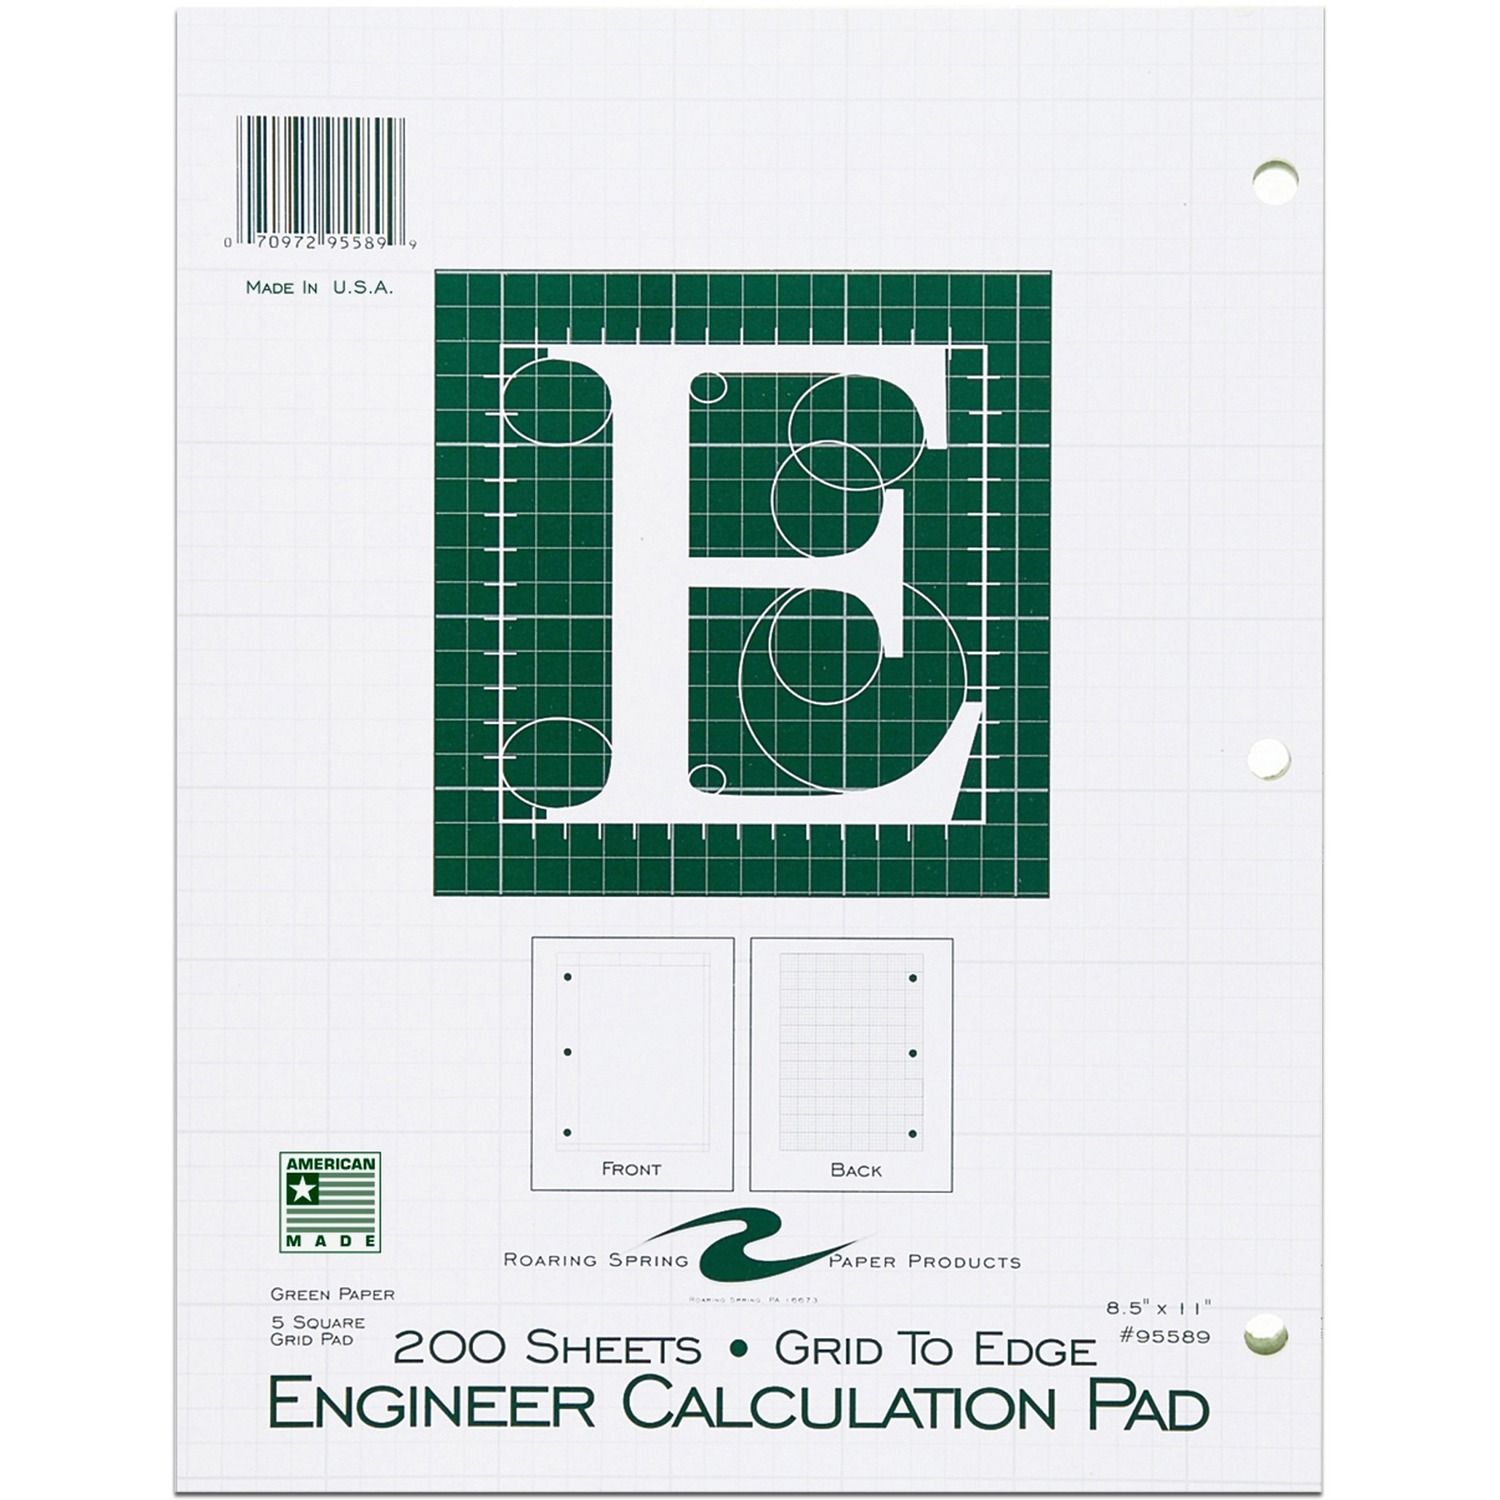 5x5 Grid Engineering Pad 200 Sheets, 400 Pages, Printed, Glued, Back Ruling Surface, 3 Hole(s), 15 lb Basis Weight, 56 g/m2 Grammage, 11" x 8 1/2", 0.66" x 8.5"11", Green Paper, Chipboard Cover